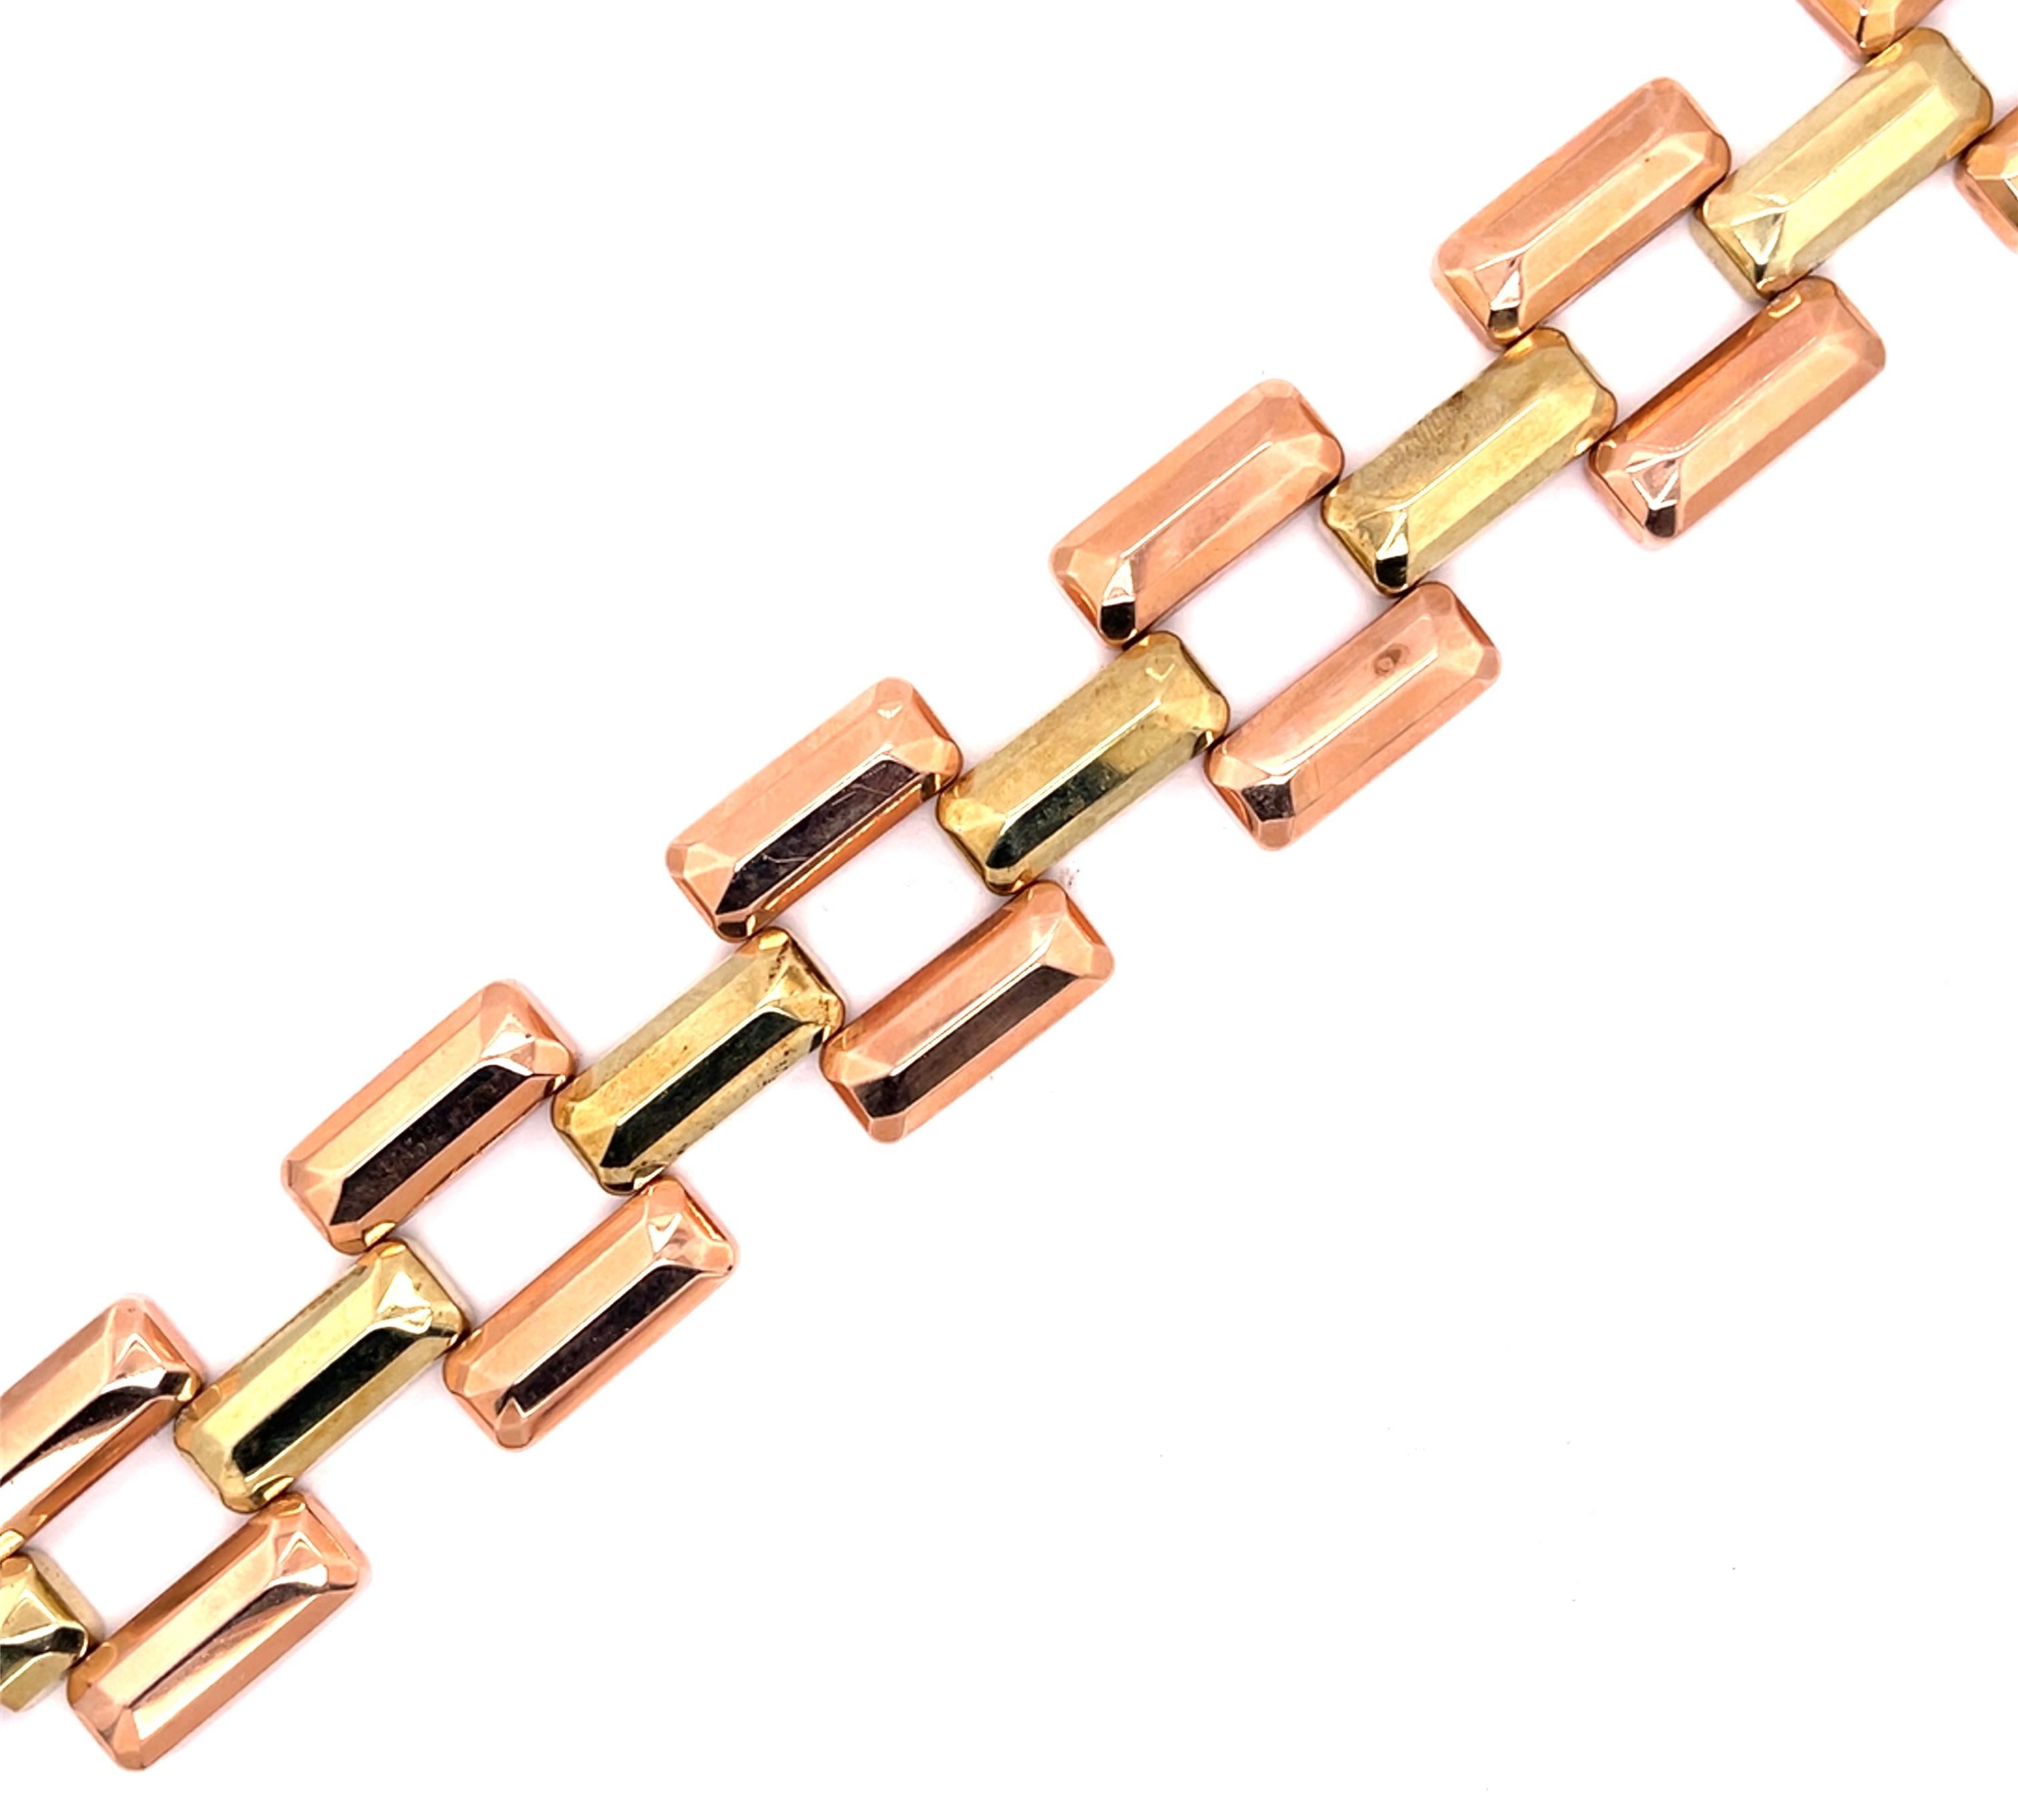 14 Karat Yellow and Rose Gold  8.5 Inch Bracelet. This stunning two tone bracelet shows just how long love can last. Dated 1953 and initialed this finely crafted contemporary piece has certainly stood the test of time when  style and grace are